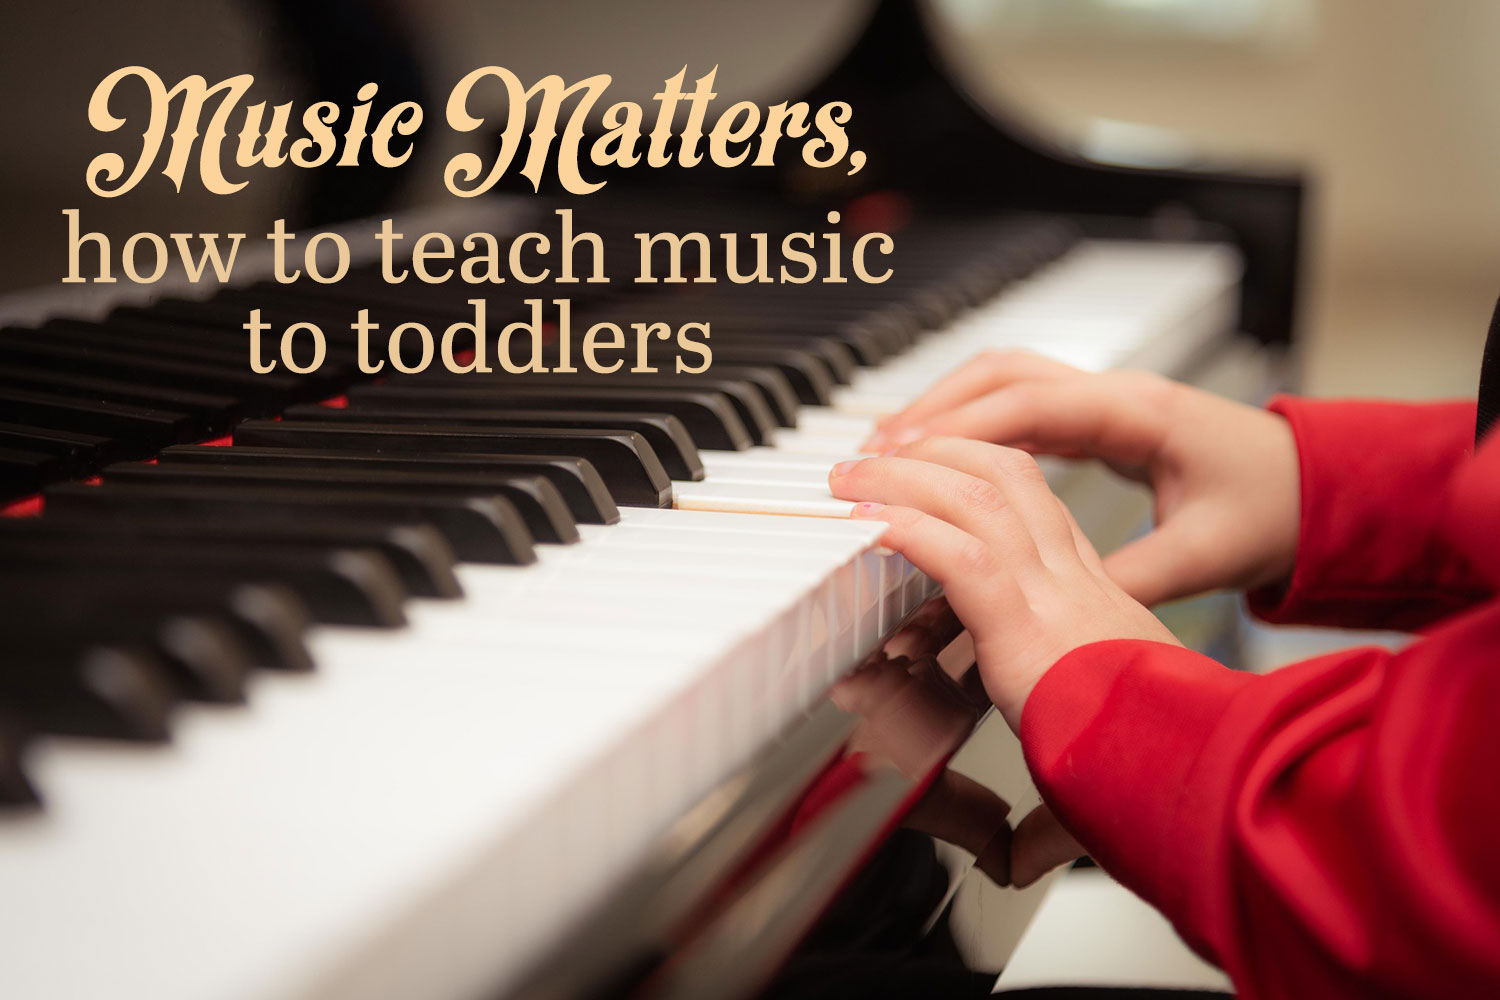 Music matters- how to teach music to toddlers